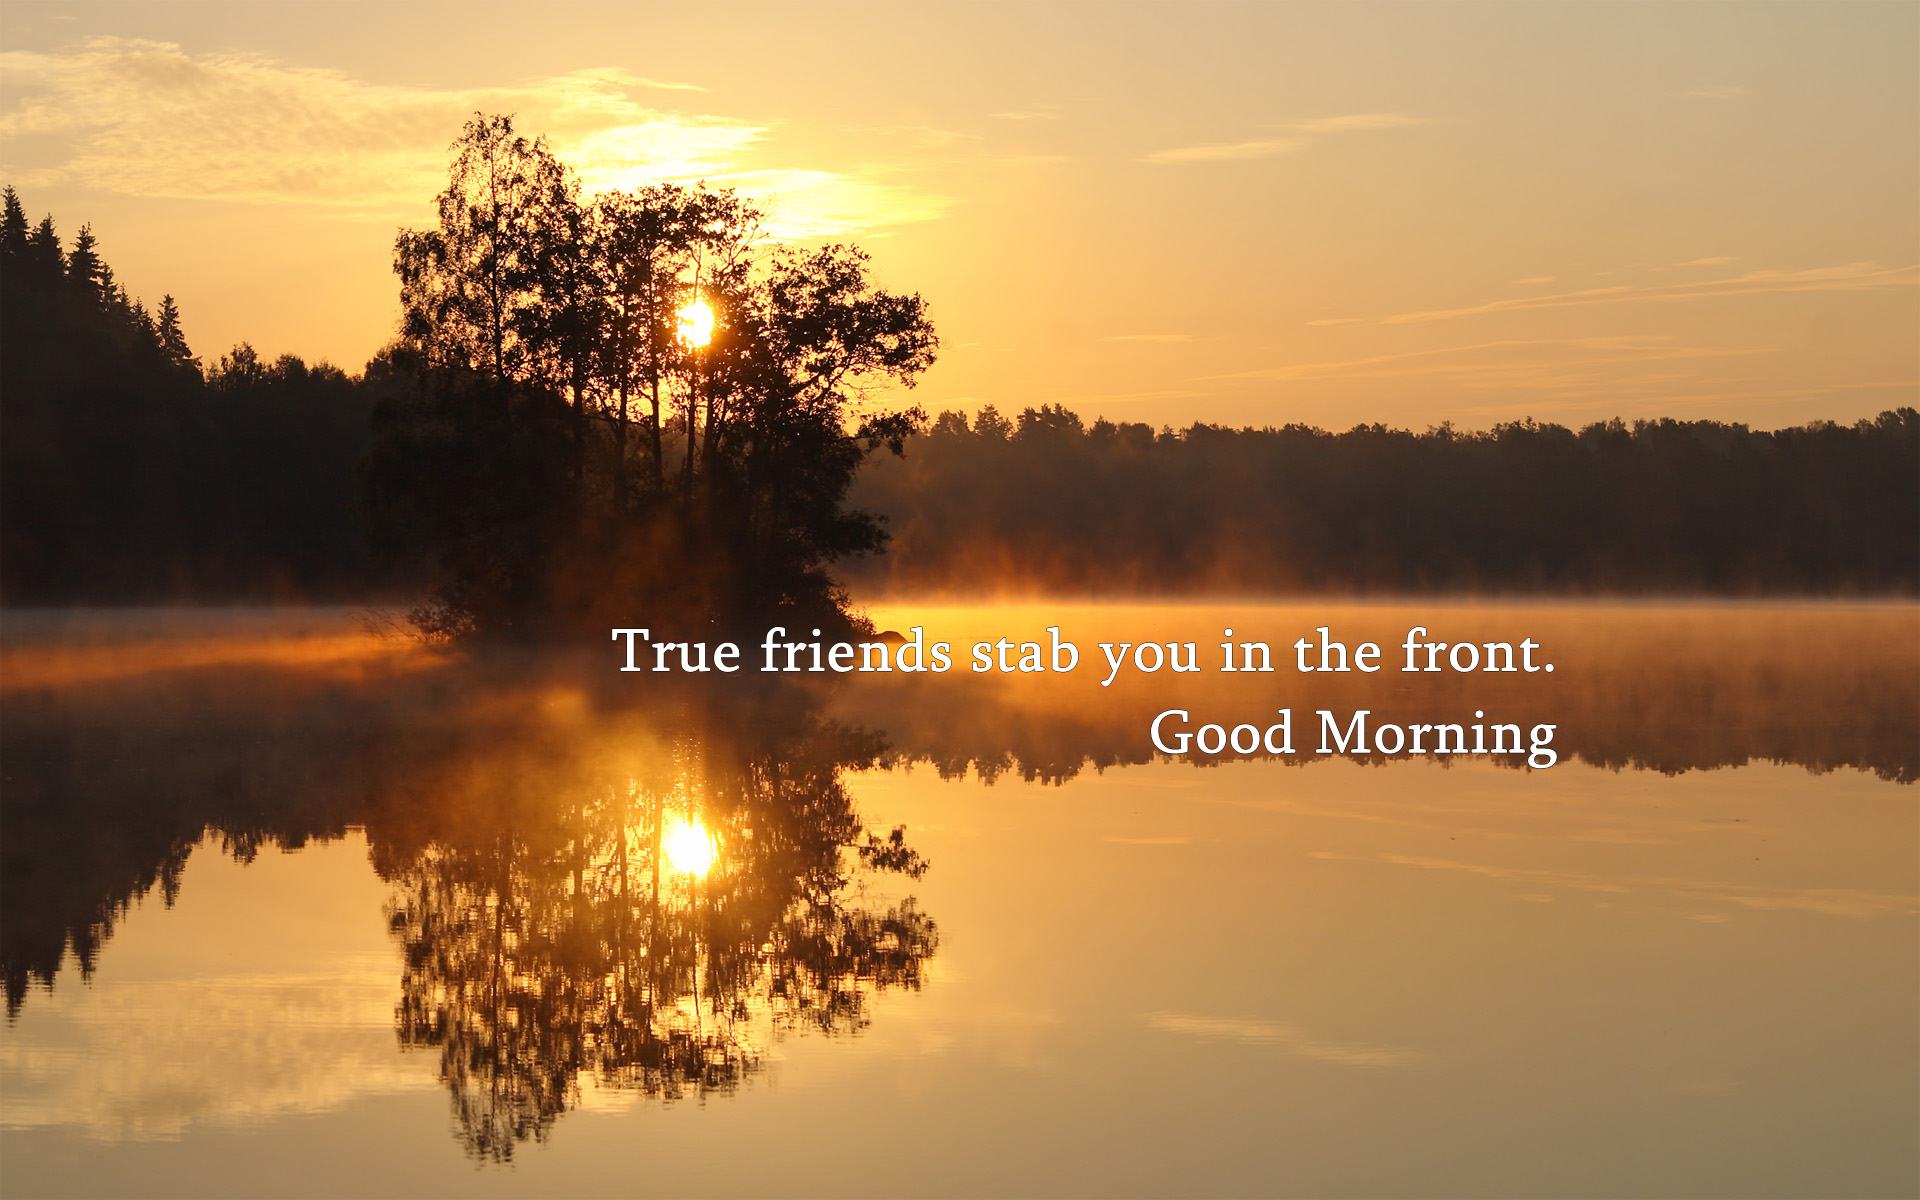 Good Morning Quotes For Facebook Wallpaper - Good Wallpaper For Facebook - HD Wallpaper 